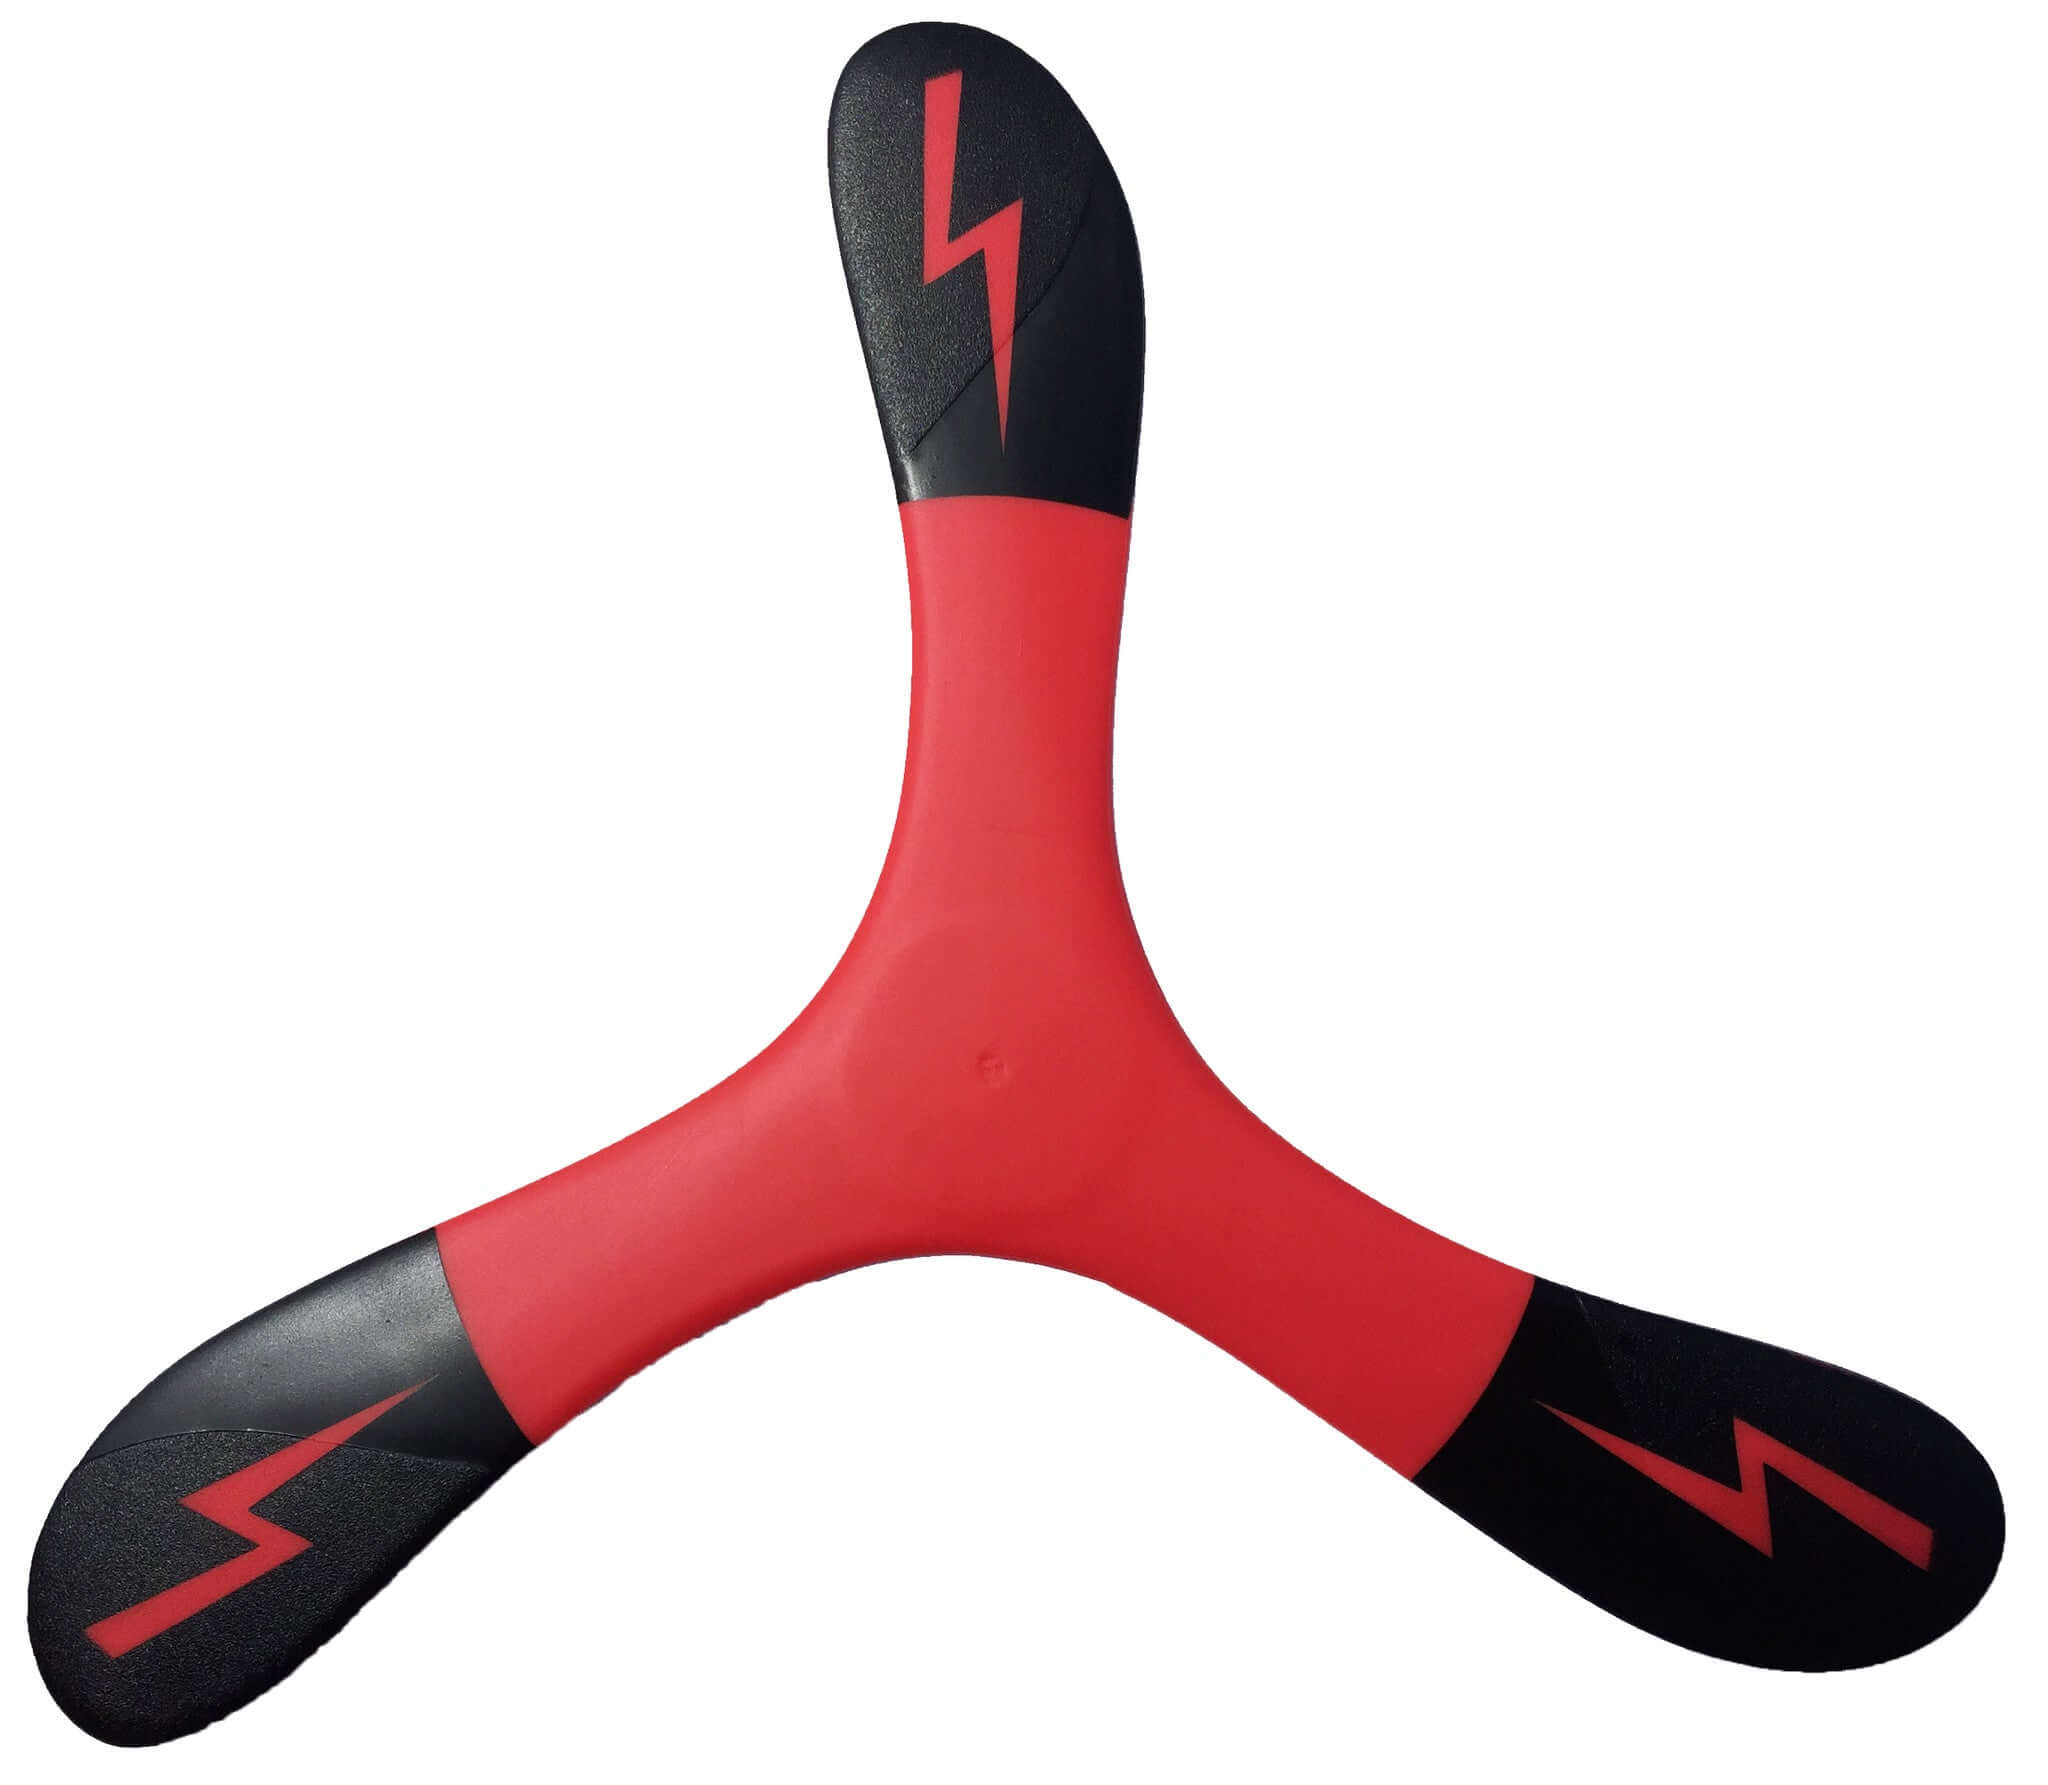 Red Bolt Boomerang - Fast Catch with Attitude!